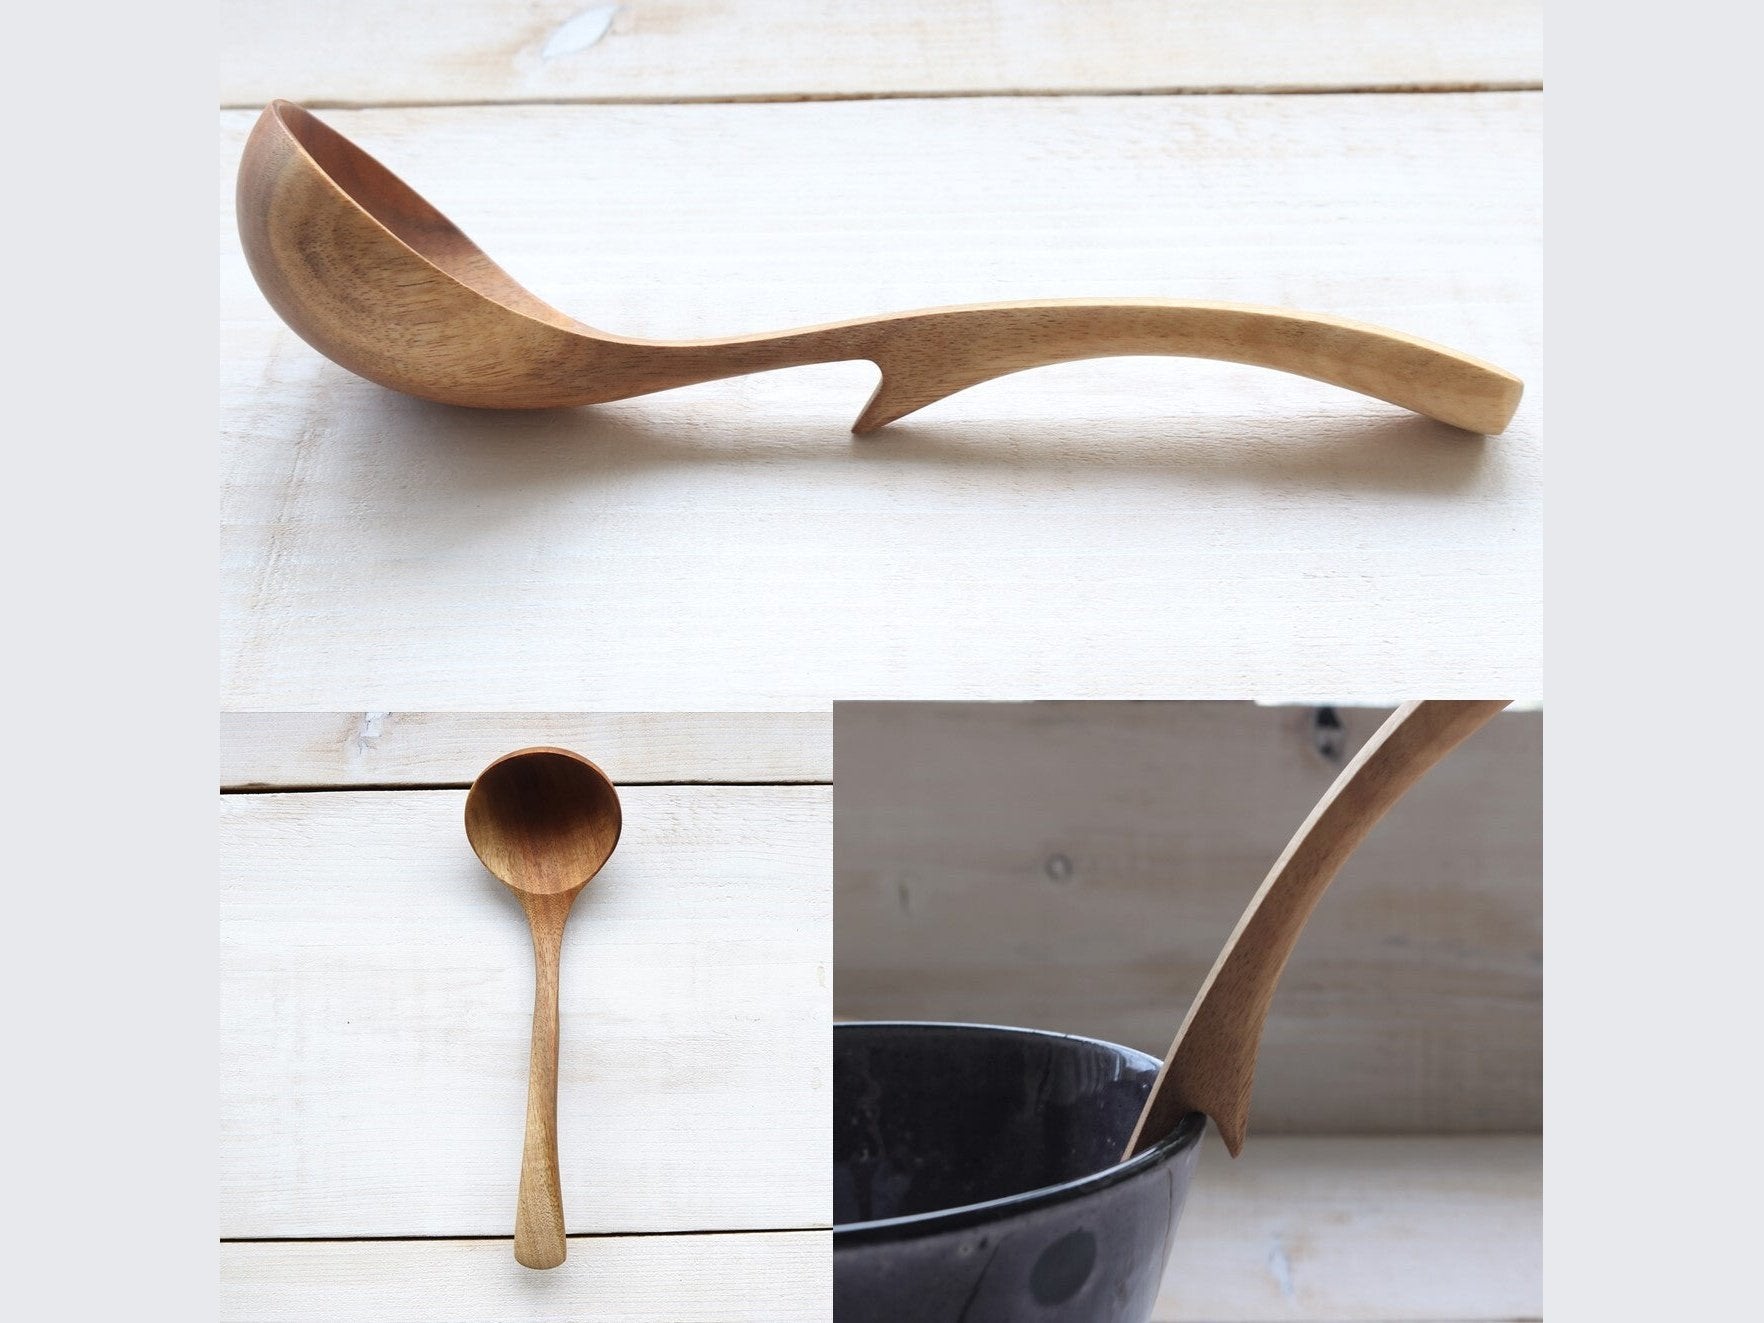 Wakacho Wooden Ladle with Stopper